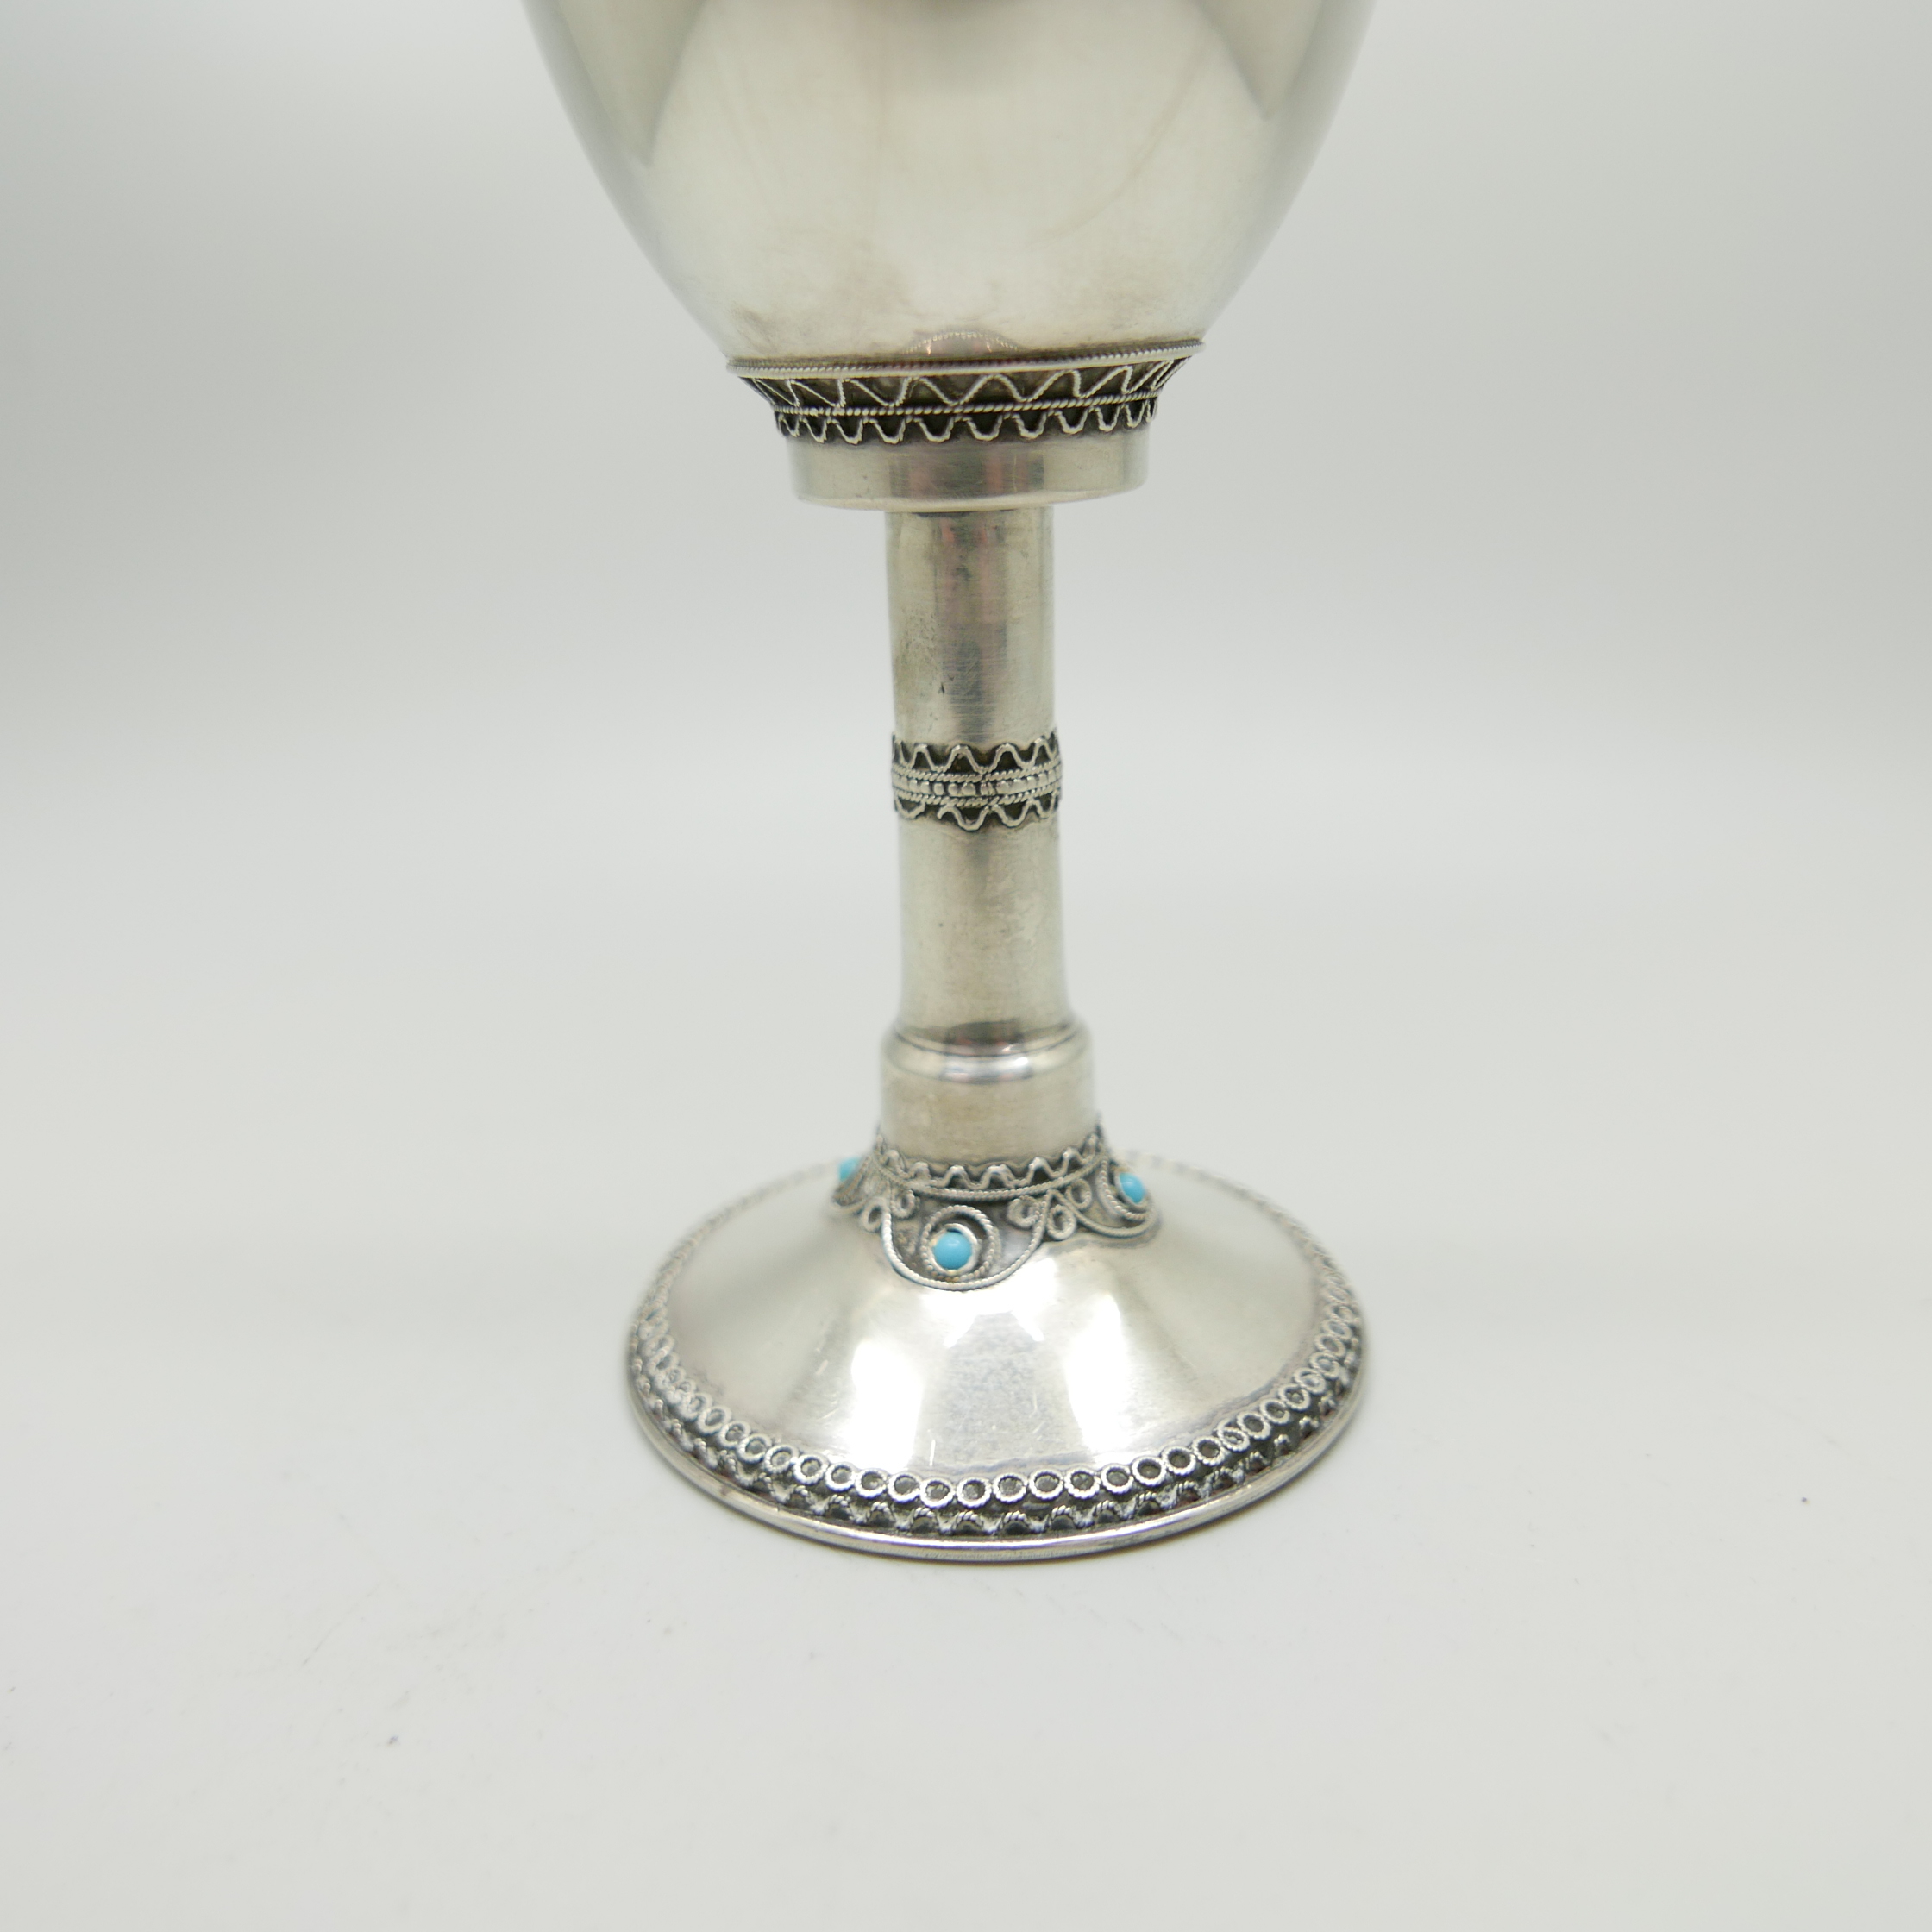 A Stanetzky 20th Century silver and turquoise goblet with beaded detail, 97.6g, 14.5cm - Image 3 of 6